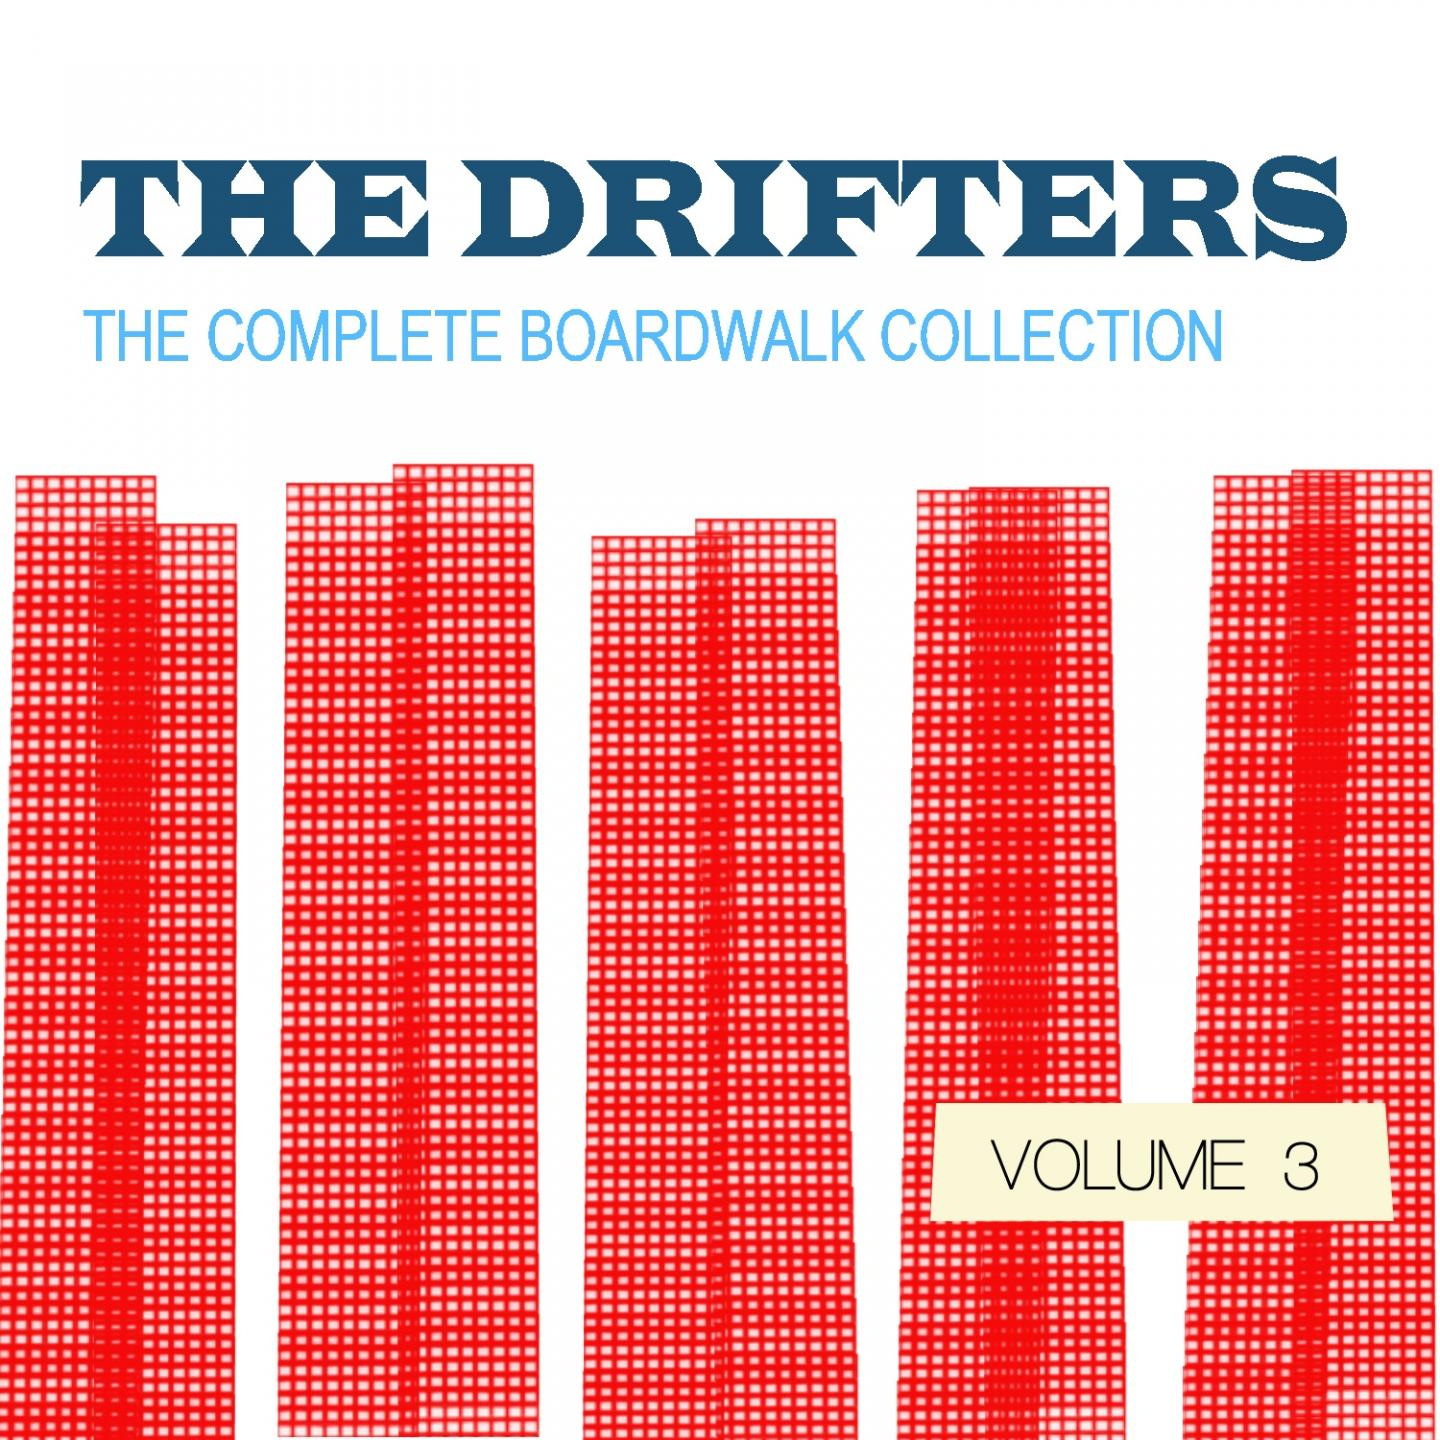 The Drifters: The Complete Boardwalk Collection, Vol. 3